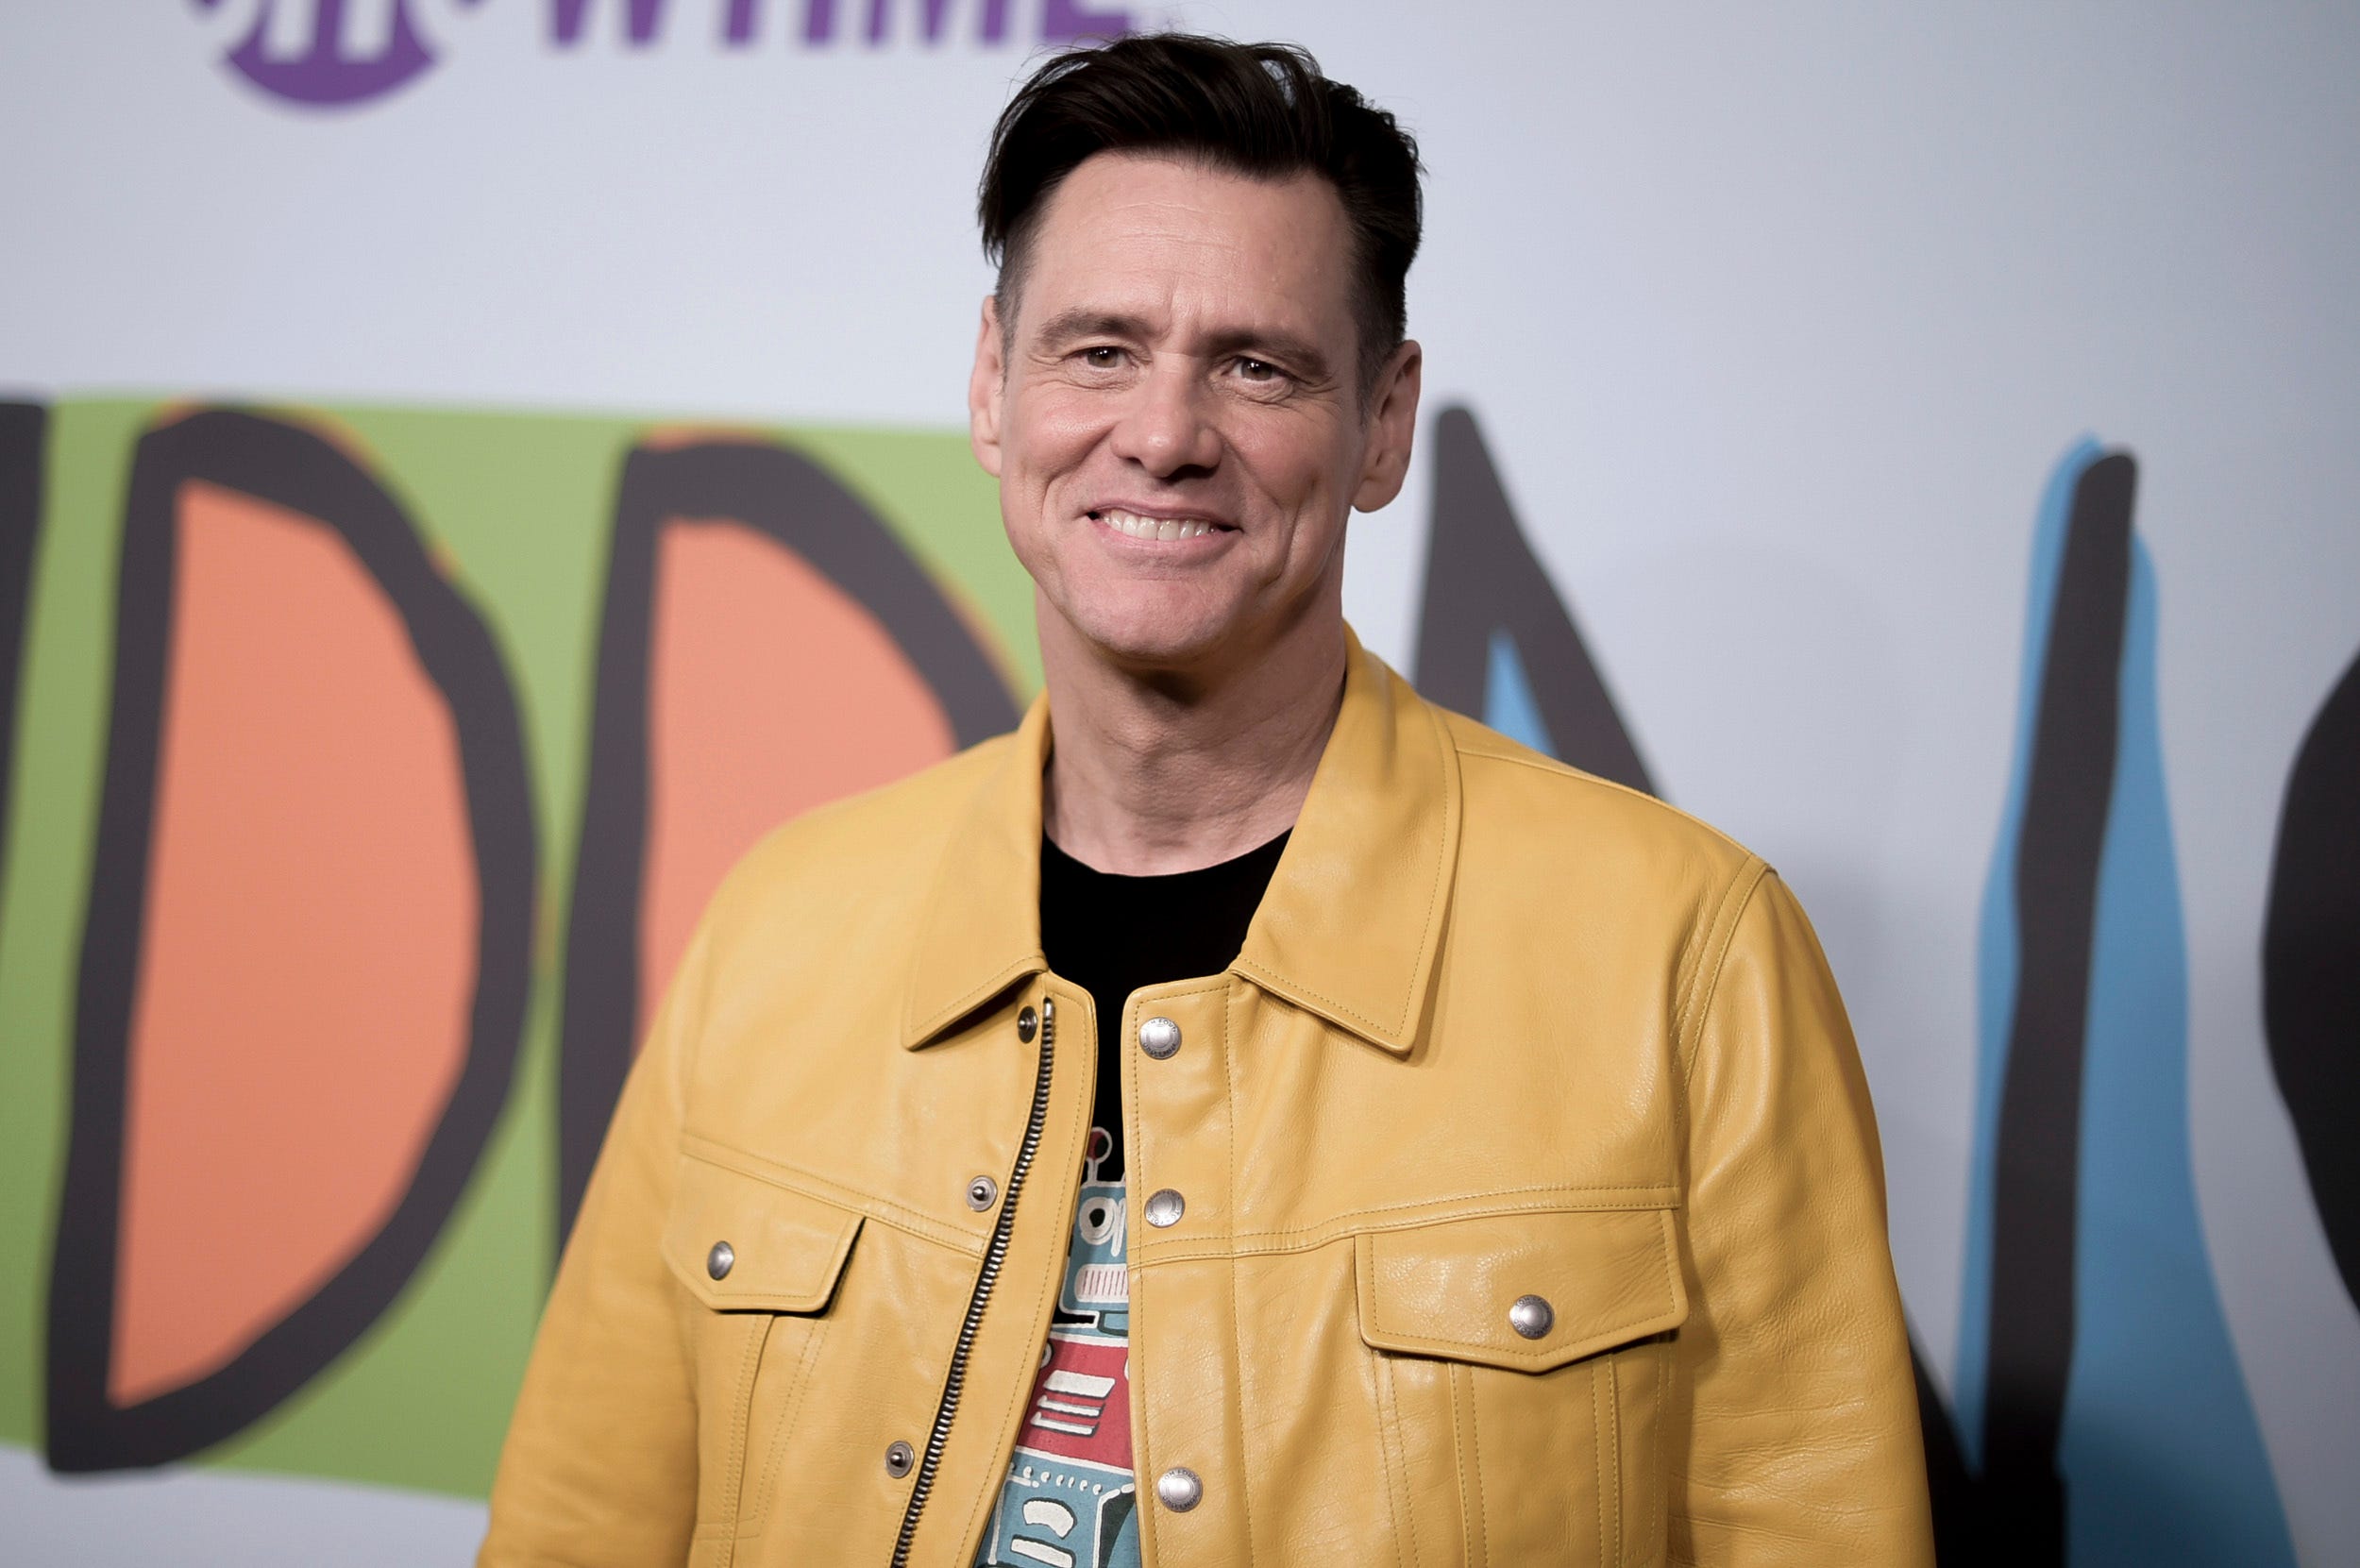 Jim Carrey takes on romance, acting with 'Memoirs and Misinformation'